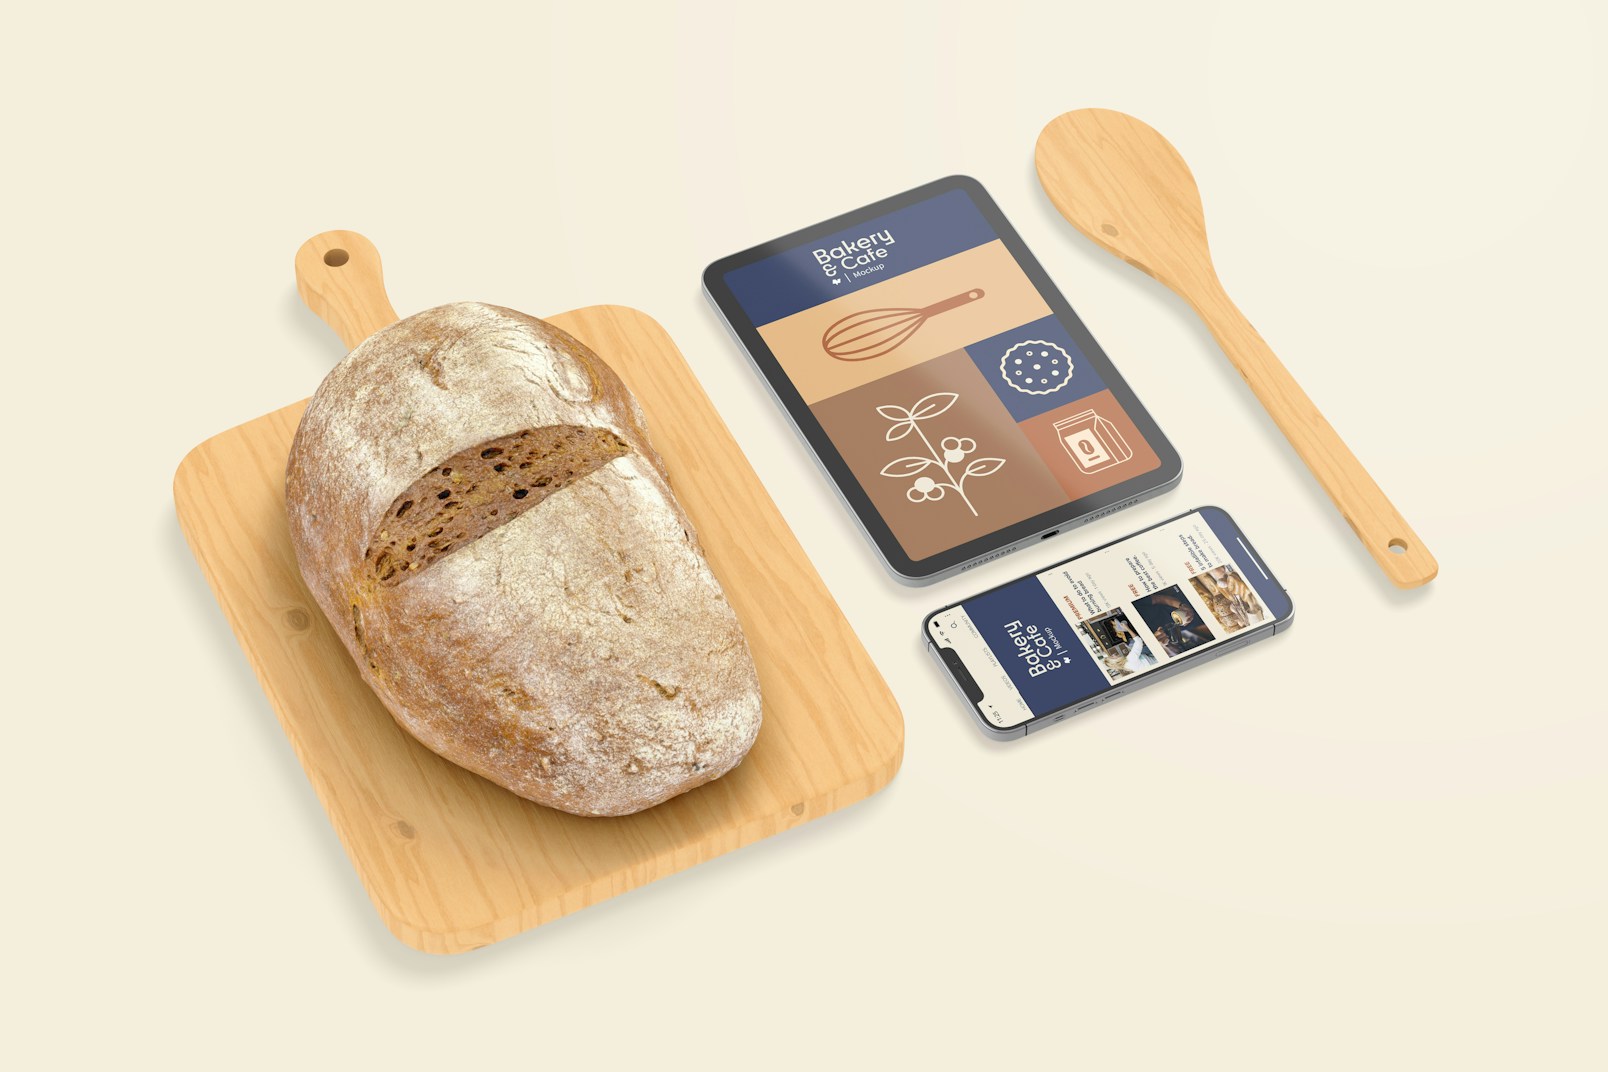 Bakery Items with Devices Mockup, Perspective